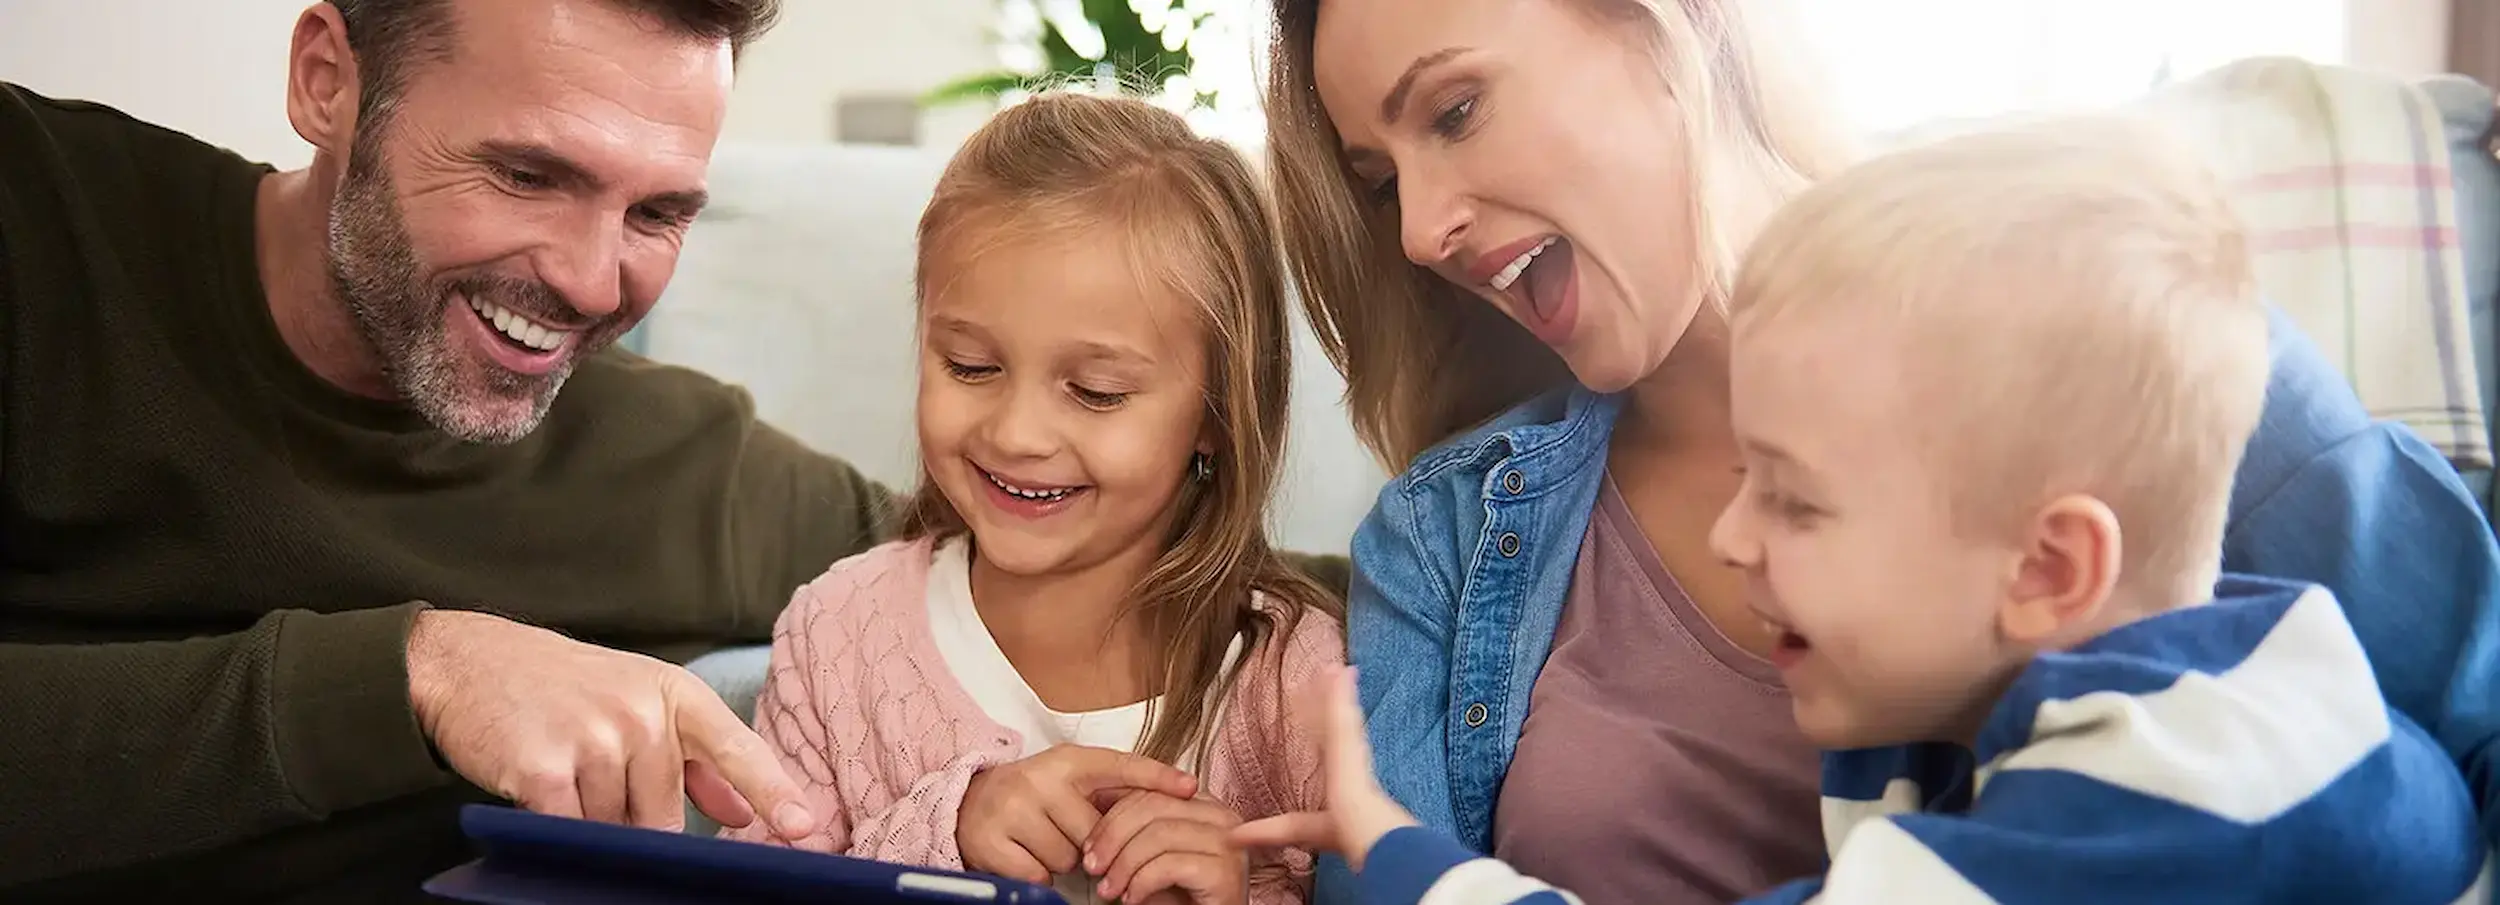 Smiling Caucasian family pointing at tablet device in brightly lit interior.